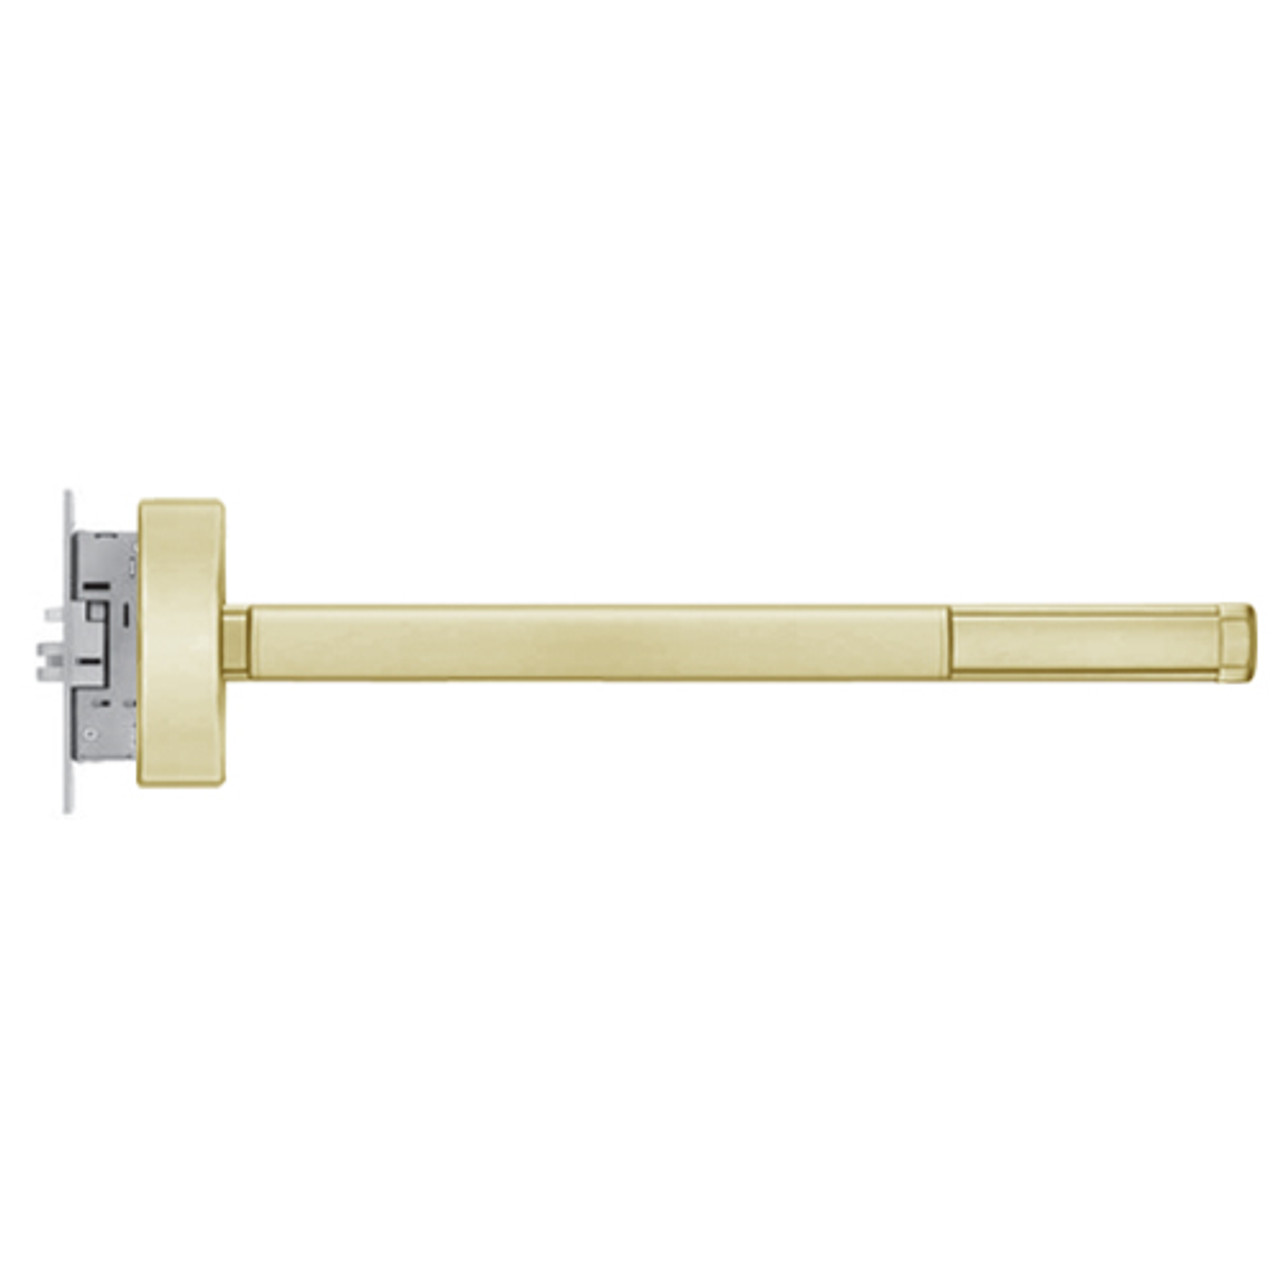 MLRFL2315-RHR-606-48 PHI 2300 Series Fire Rated Apex Mortise Exit Device with Motorized Latch Retraction Prepped for Thumb Piece Always Active in Satin Brass Finish